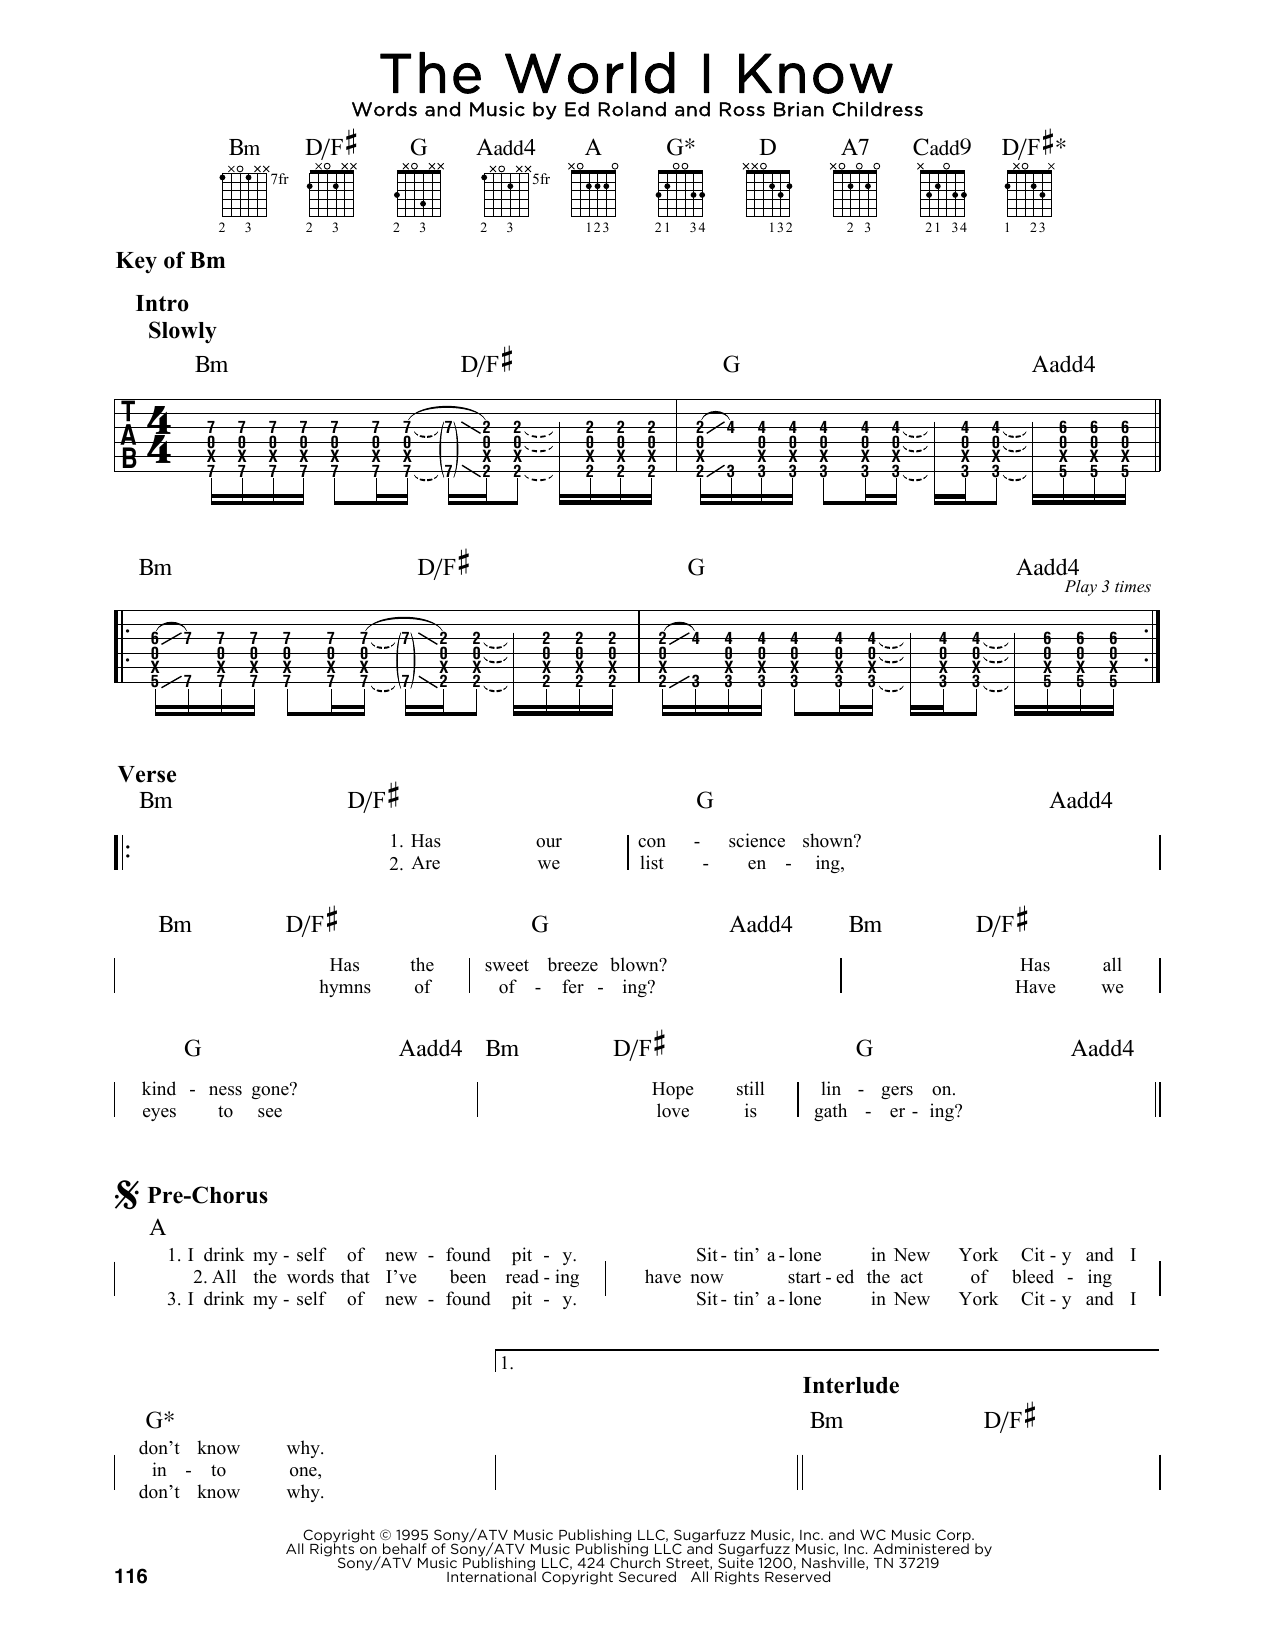 Download Collective Soul The World I Know Sheet Music